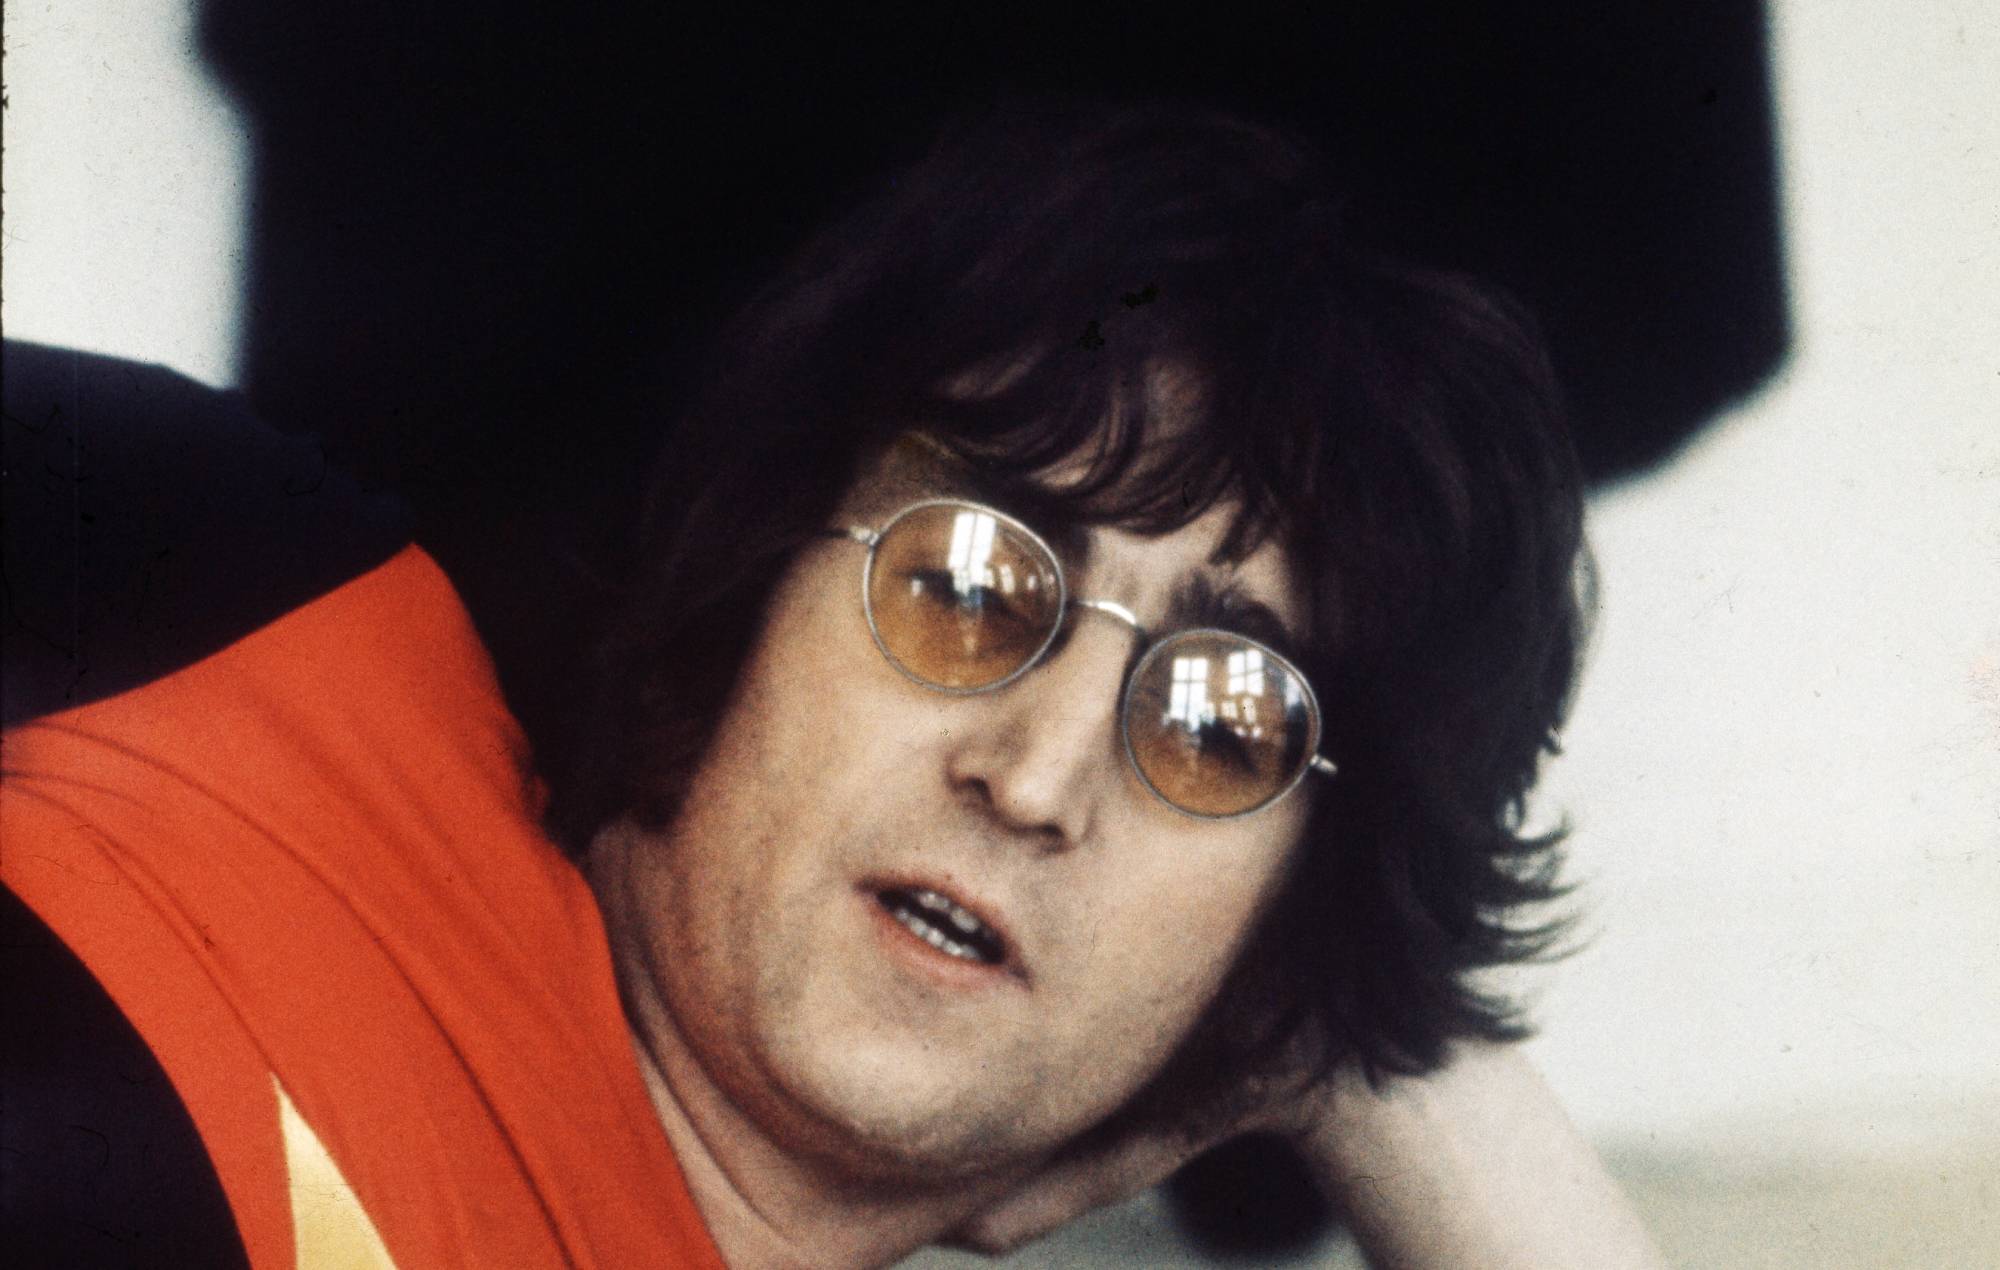 John Lennon glasses and Beatles Abbey Road photos to go up for auction